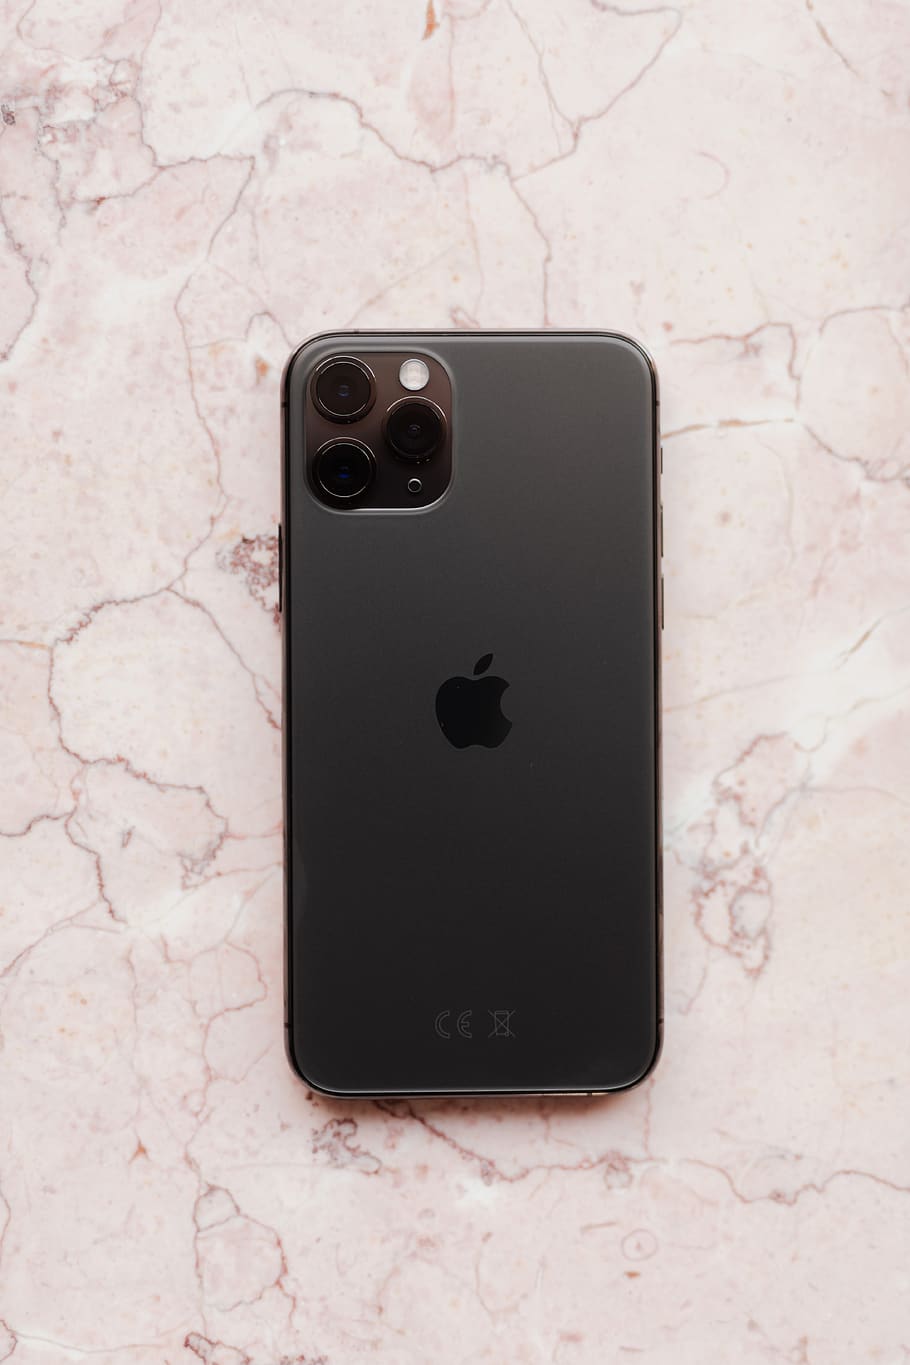 iphone 11 pro, iPhone 11, mobile, mobile phone, space gray, tech, technology, phone, marble, stone